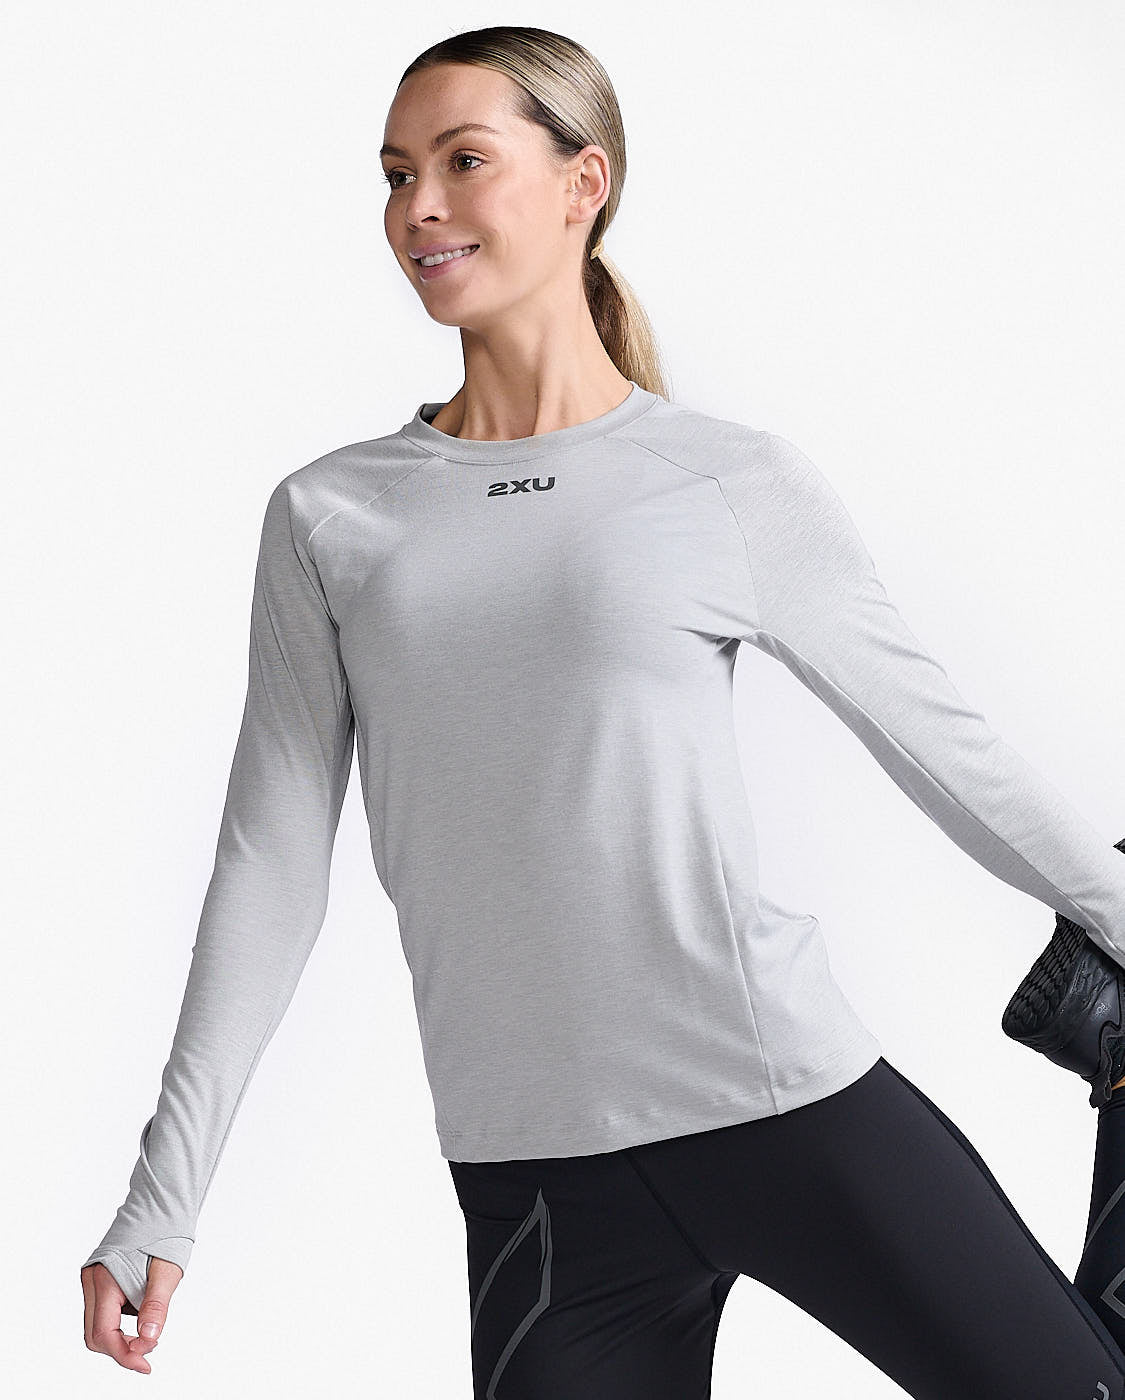 Ignition base layer L/S - grey marle - Tops